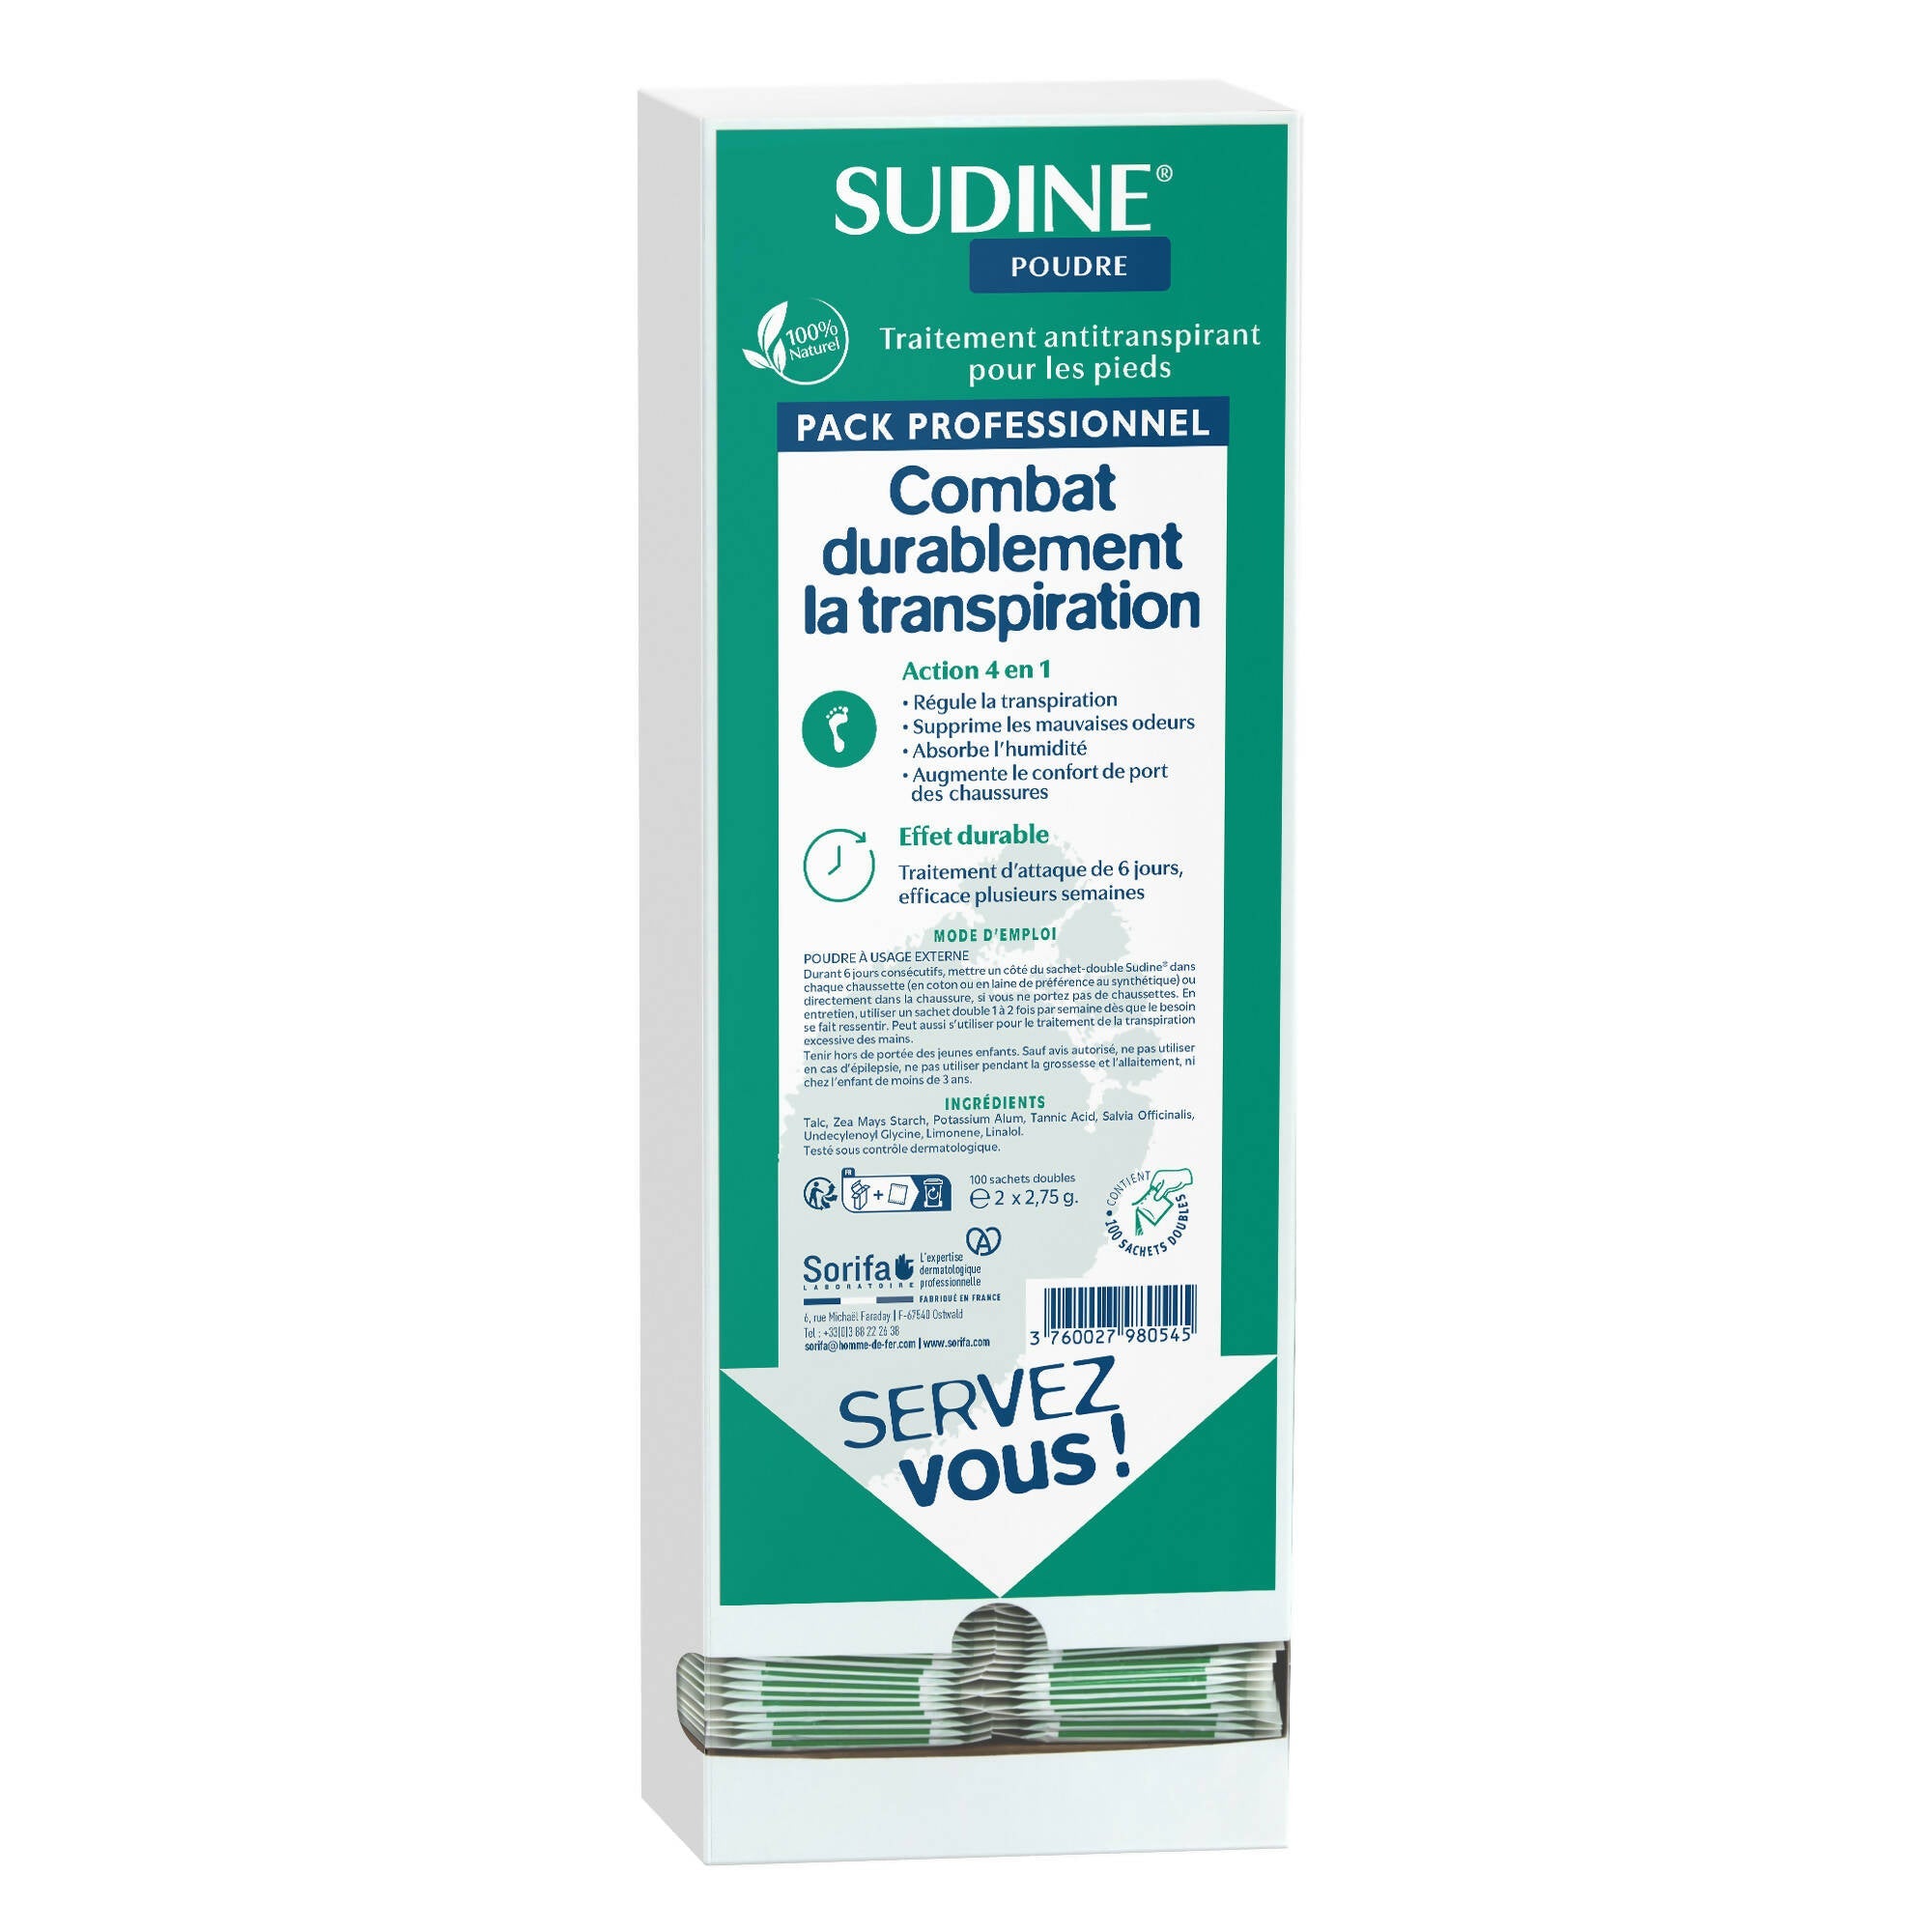 SORIFA - Complete box of 7 - Sudine Antiperspirant Treatment Powder - Foot - Regulates perspiration - Absorbs - Prevents fungal infections - Without aluminum salts - Made in France - Box of 100 double sachets - 0